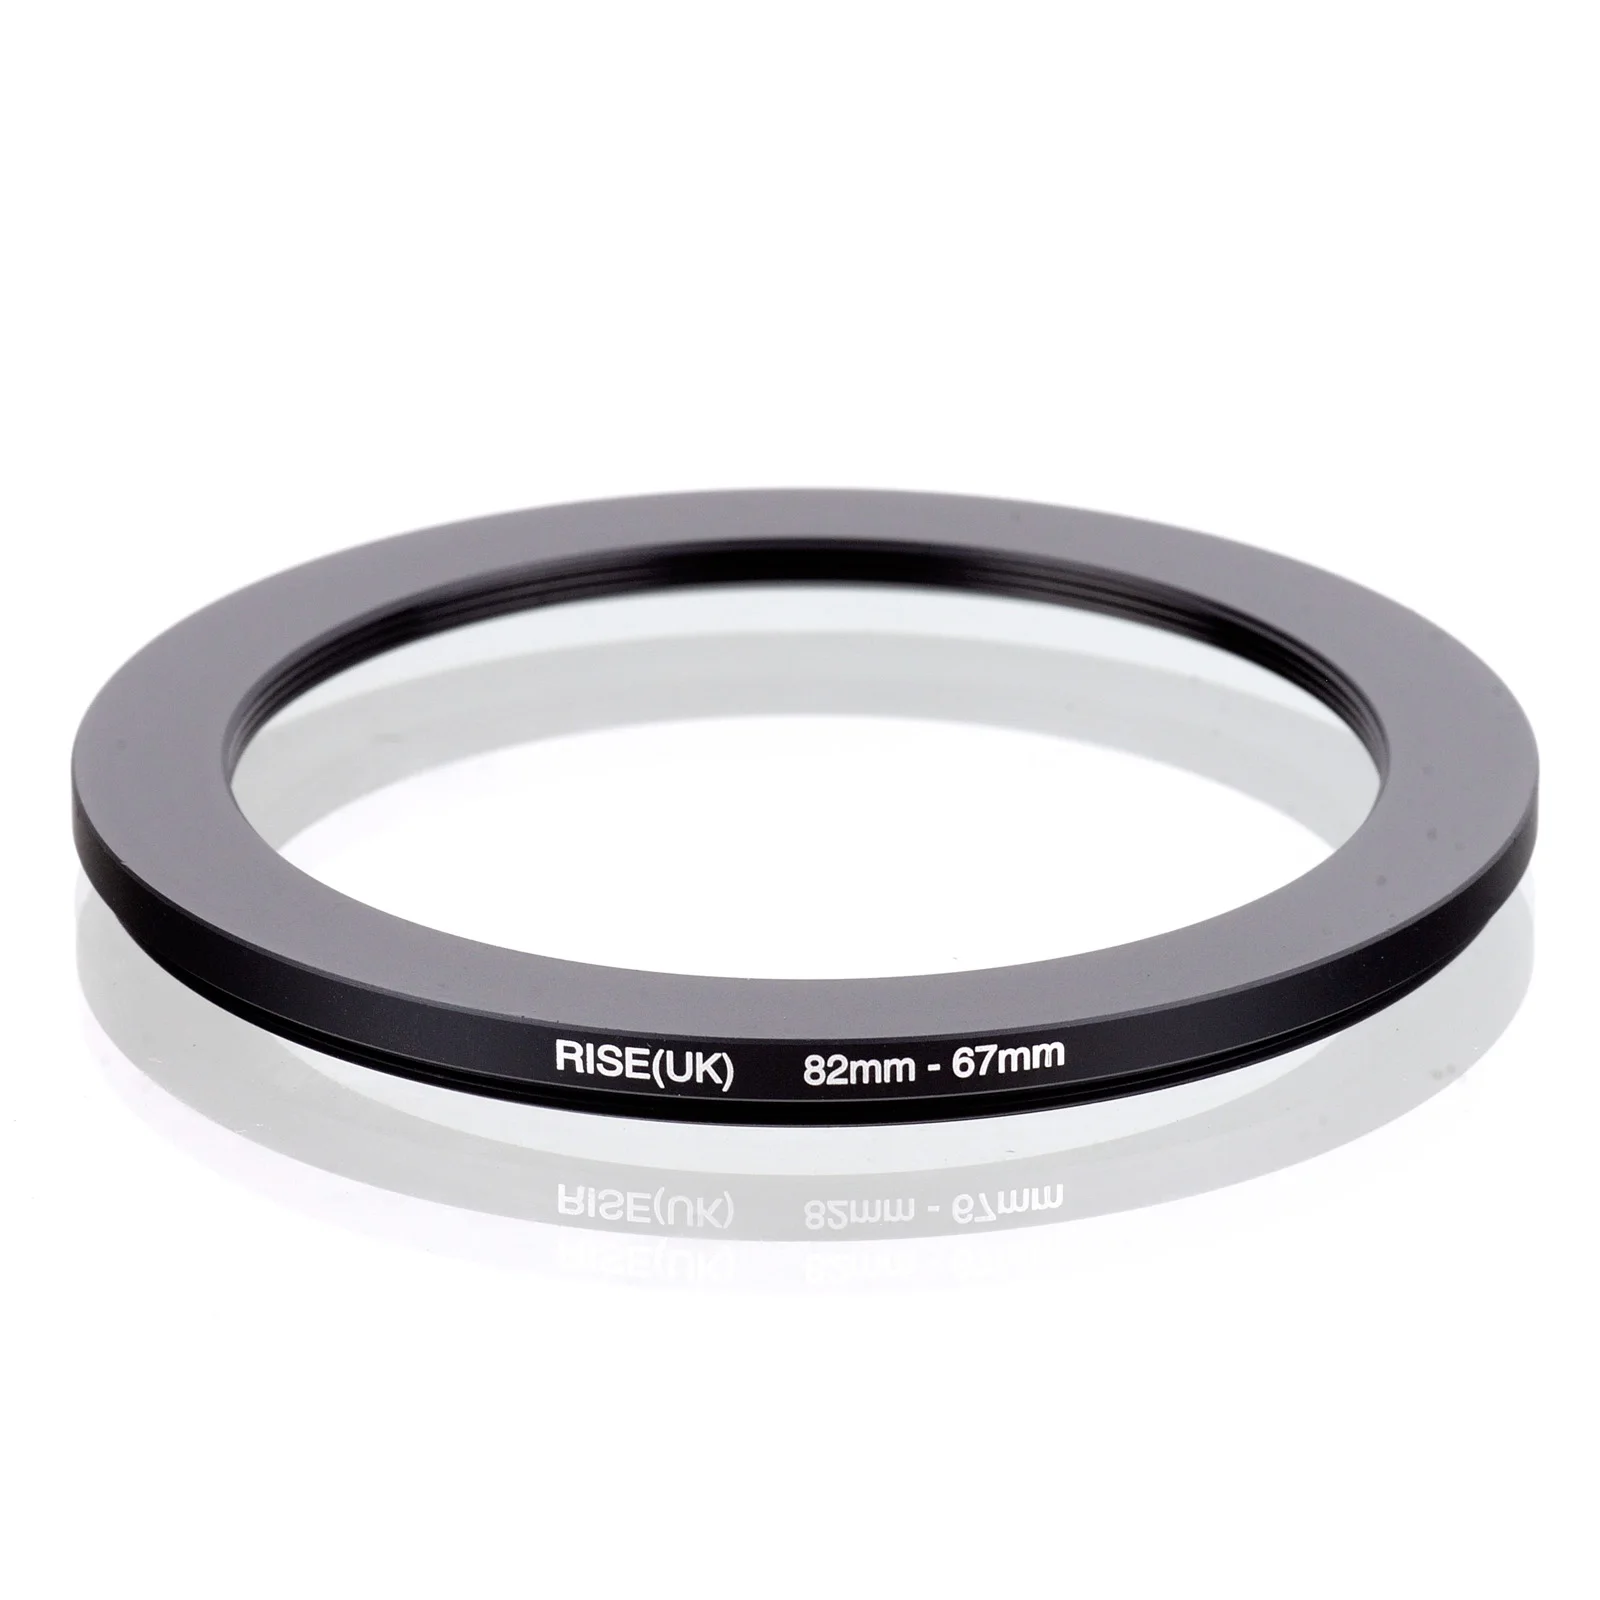 uxcell 82mm to 67mm Camera Filter Lens 82mm-67mm Step Down Ring Adapter